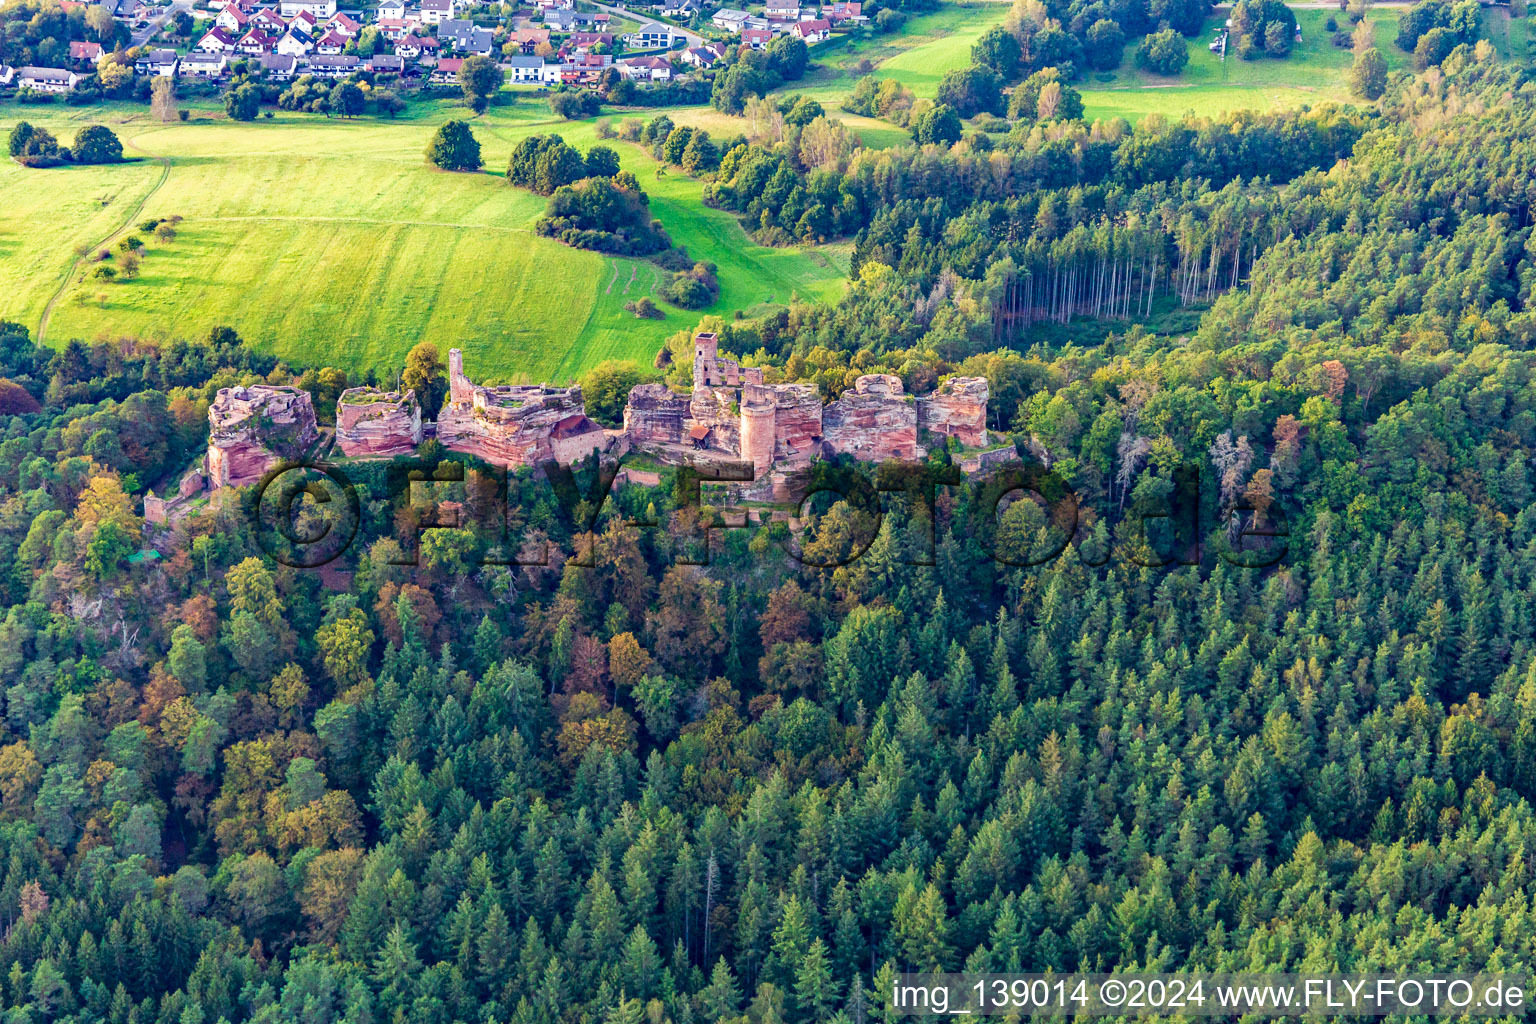 Altdahn castle massif with the Grafendahn and Tanstein castle ruins in Dahn in the state Rhineland-Palatinate, Germany